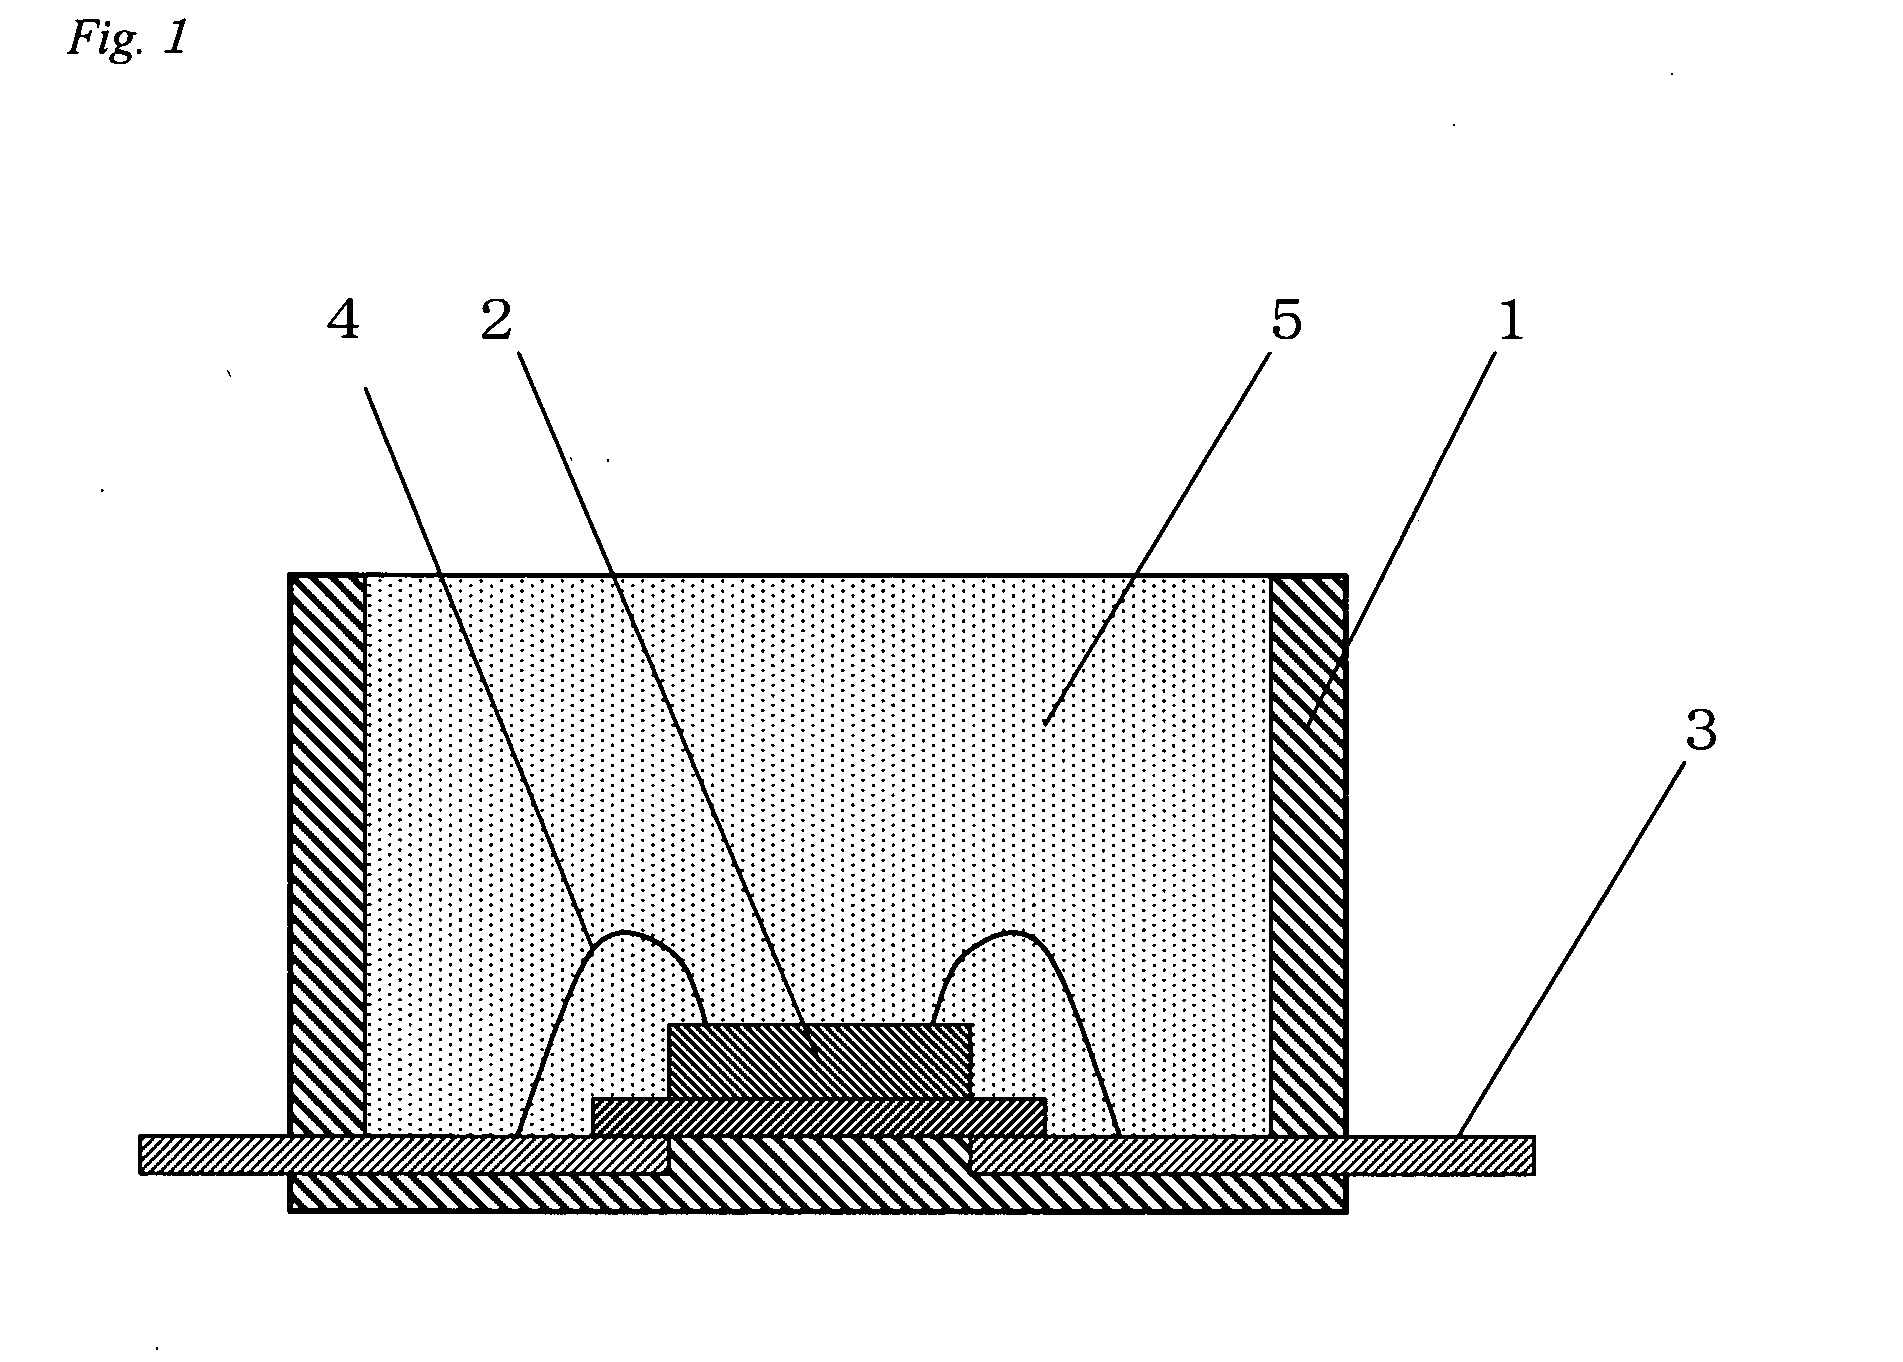 Curable Organopolysiloxane Composition and Semiconductor Device